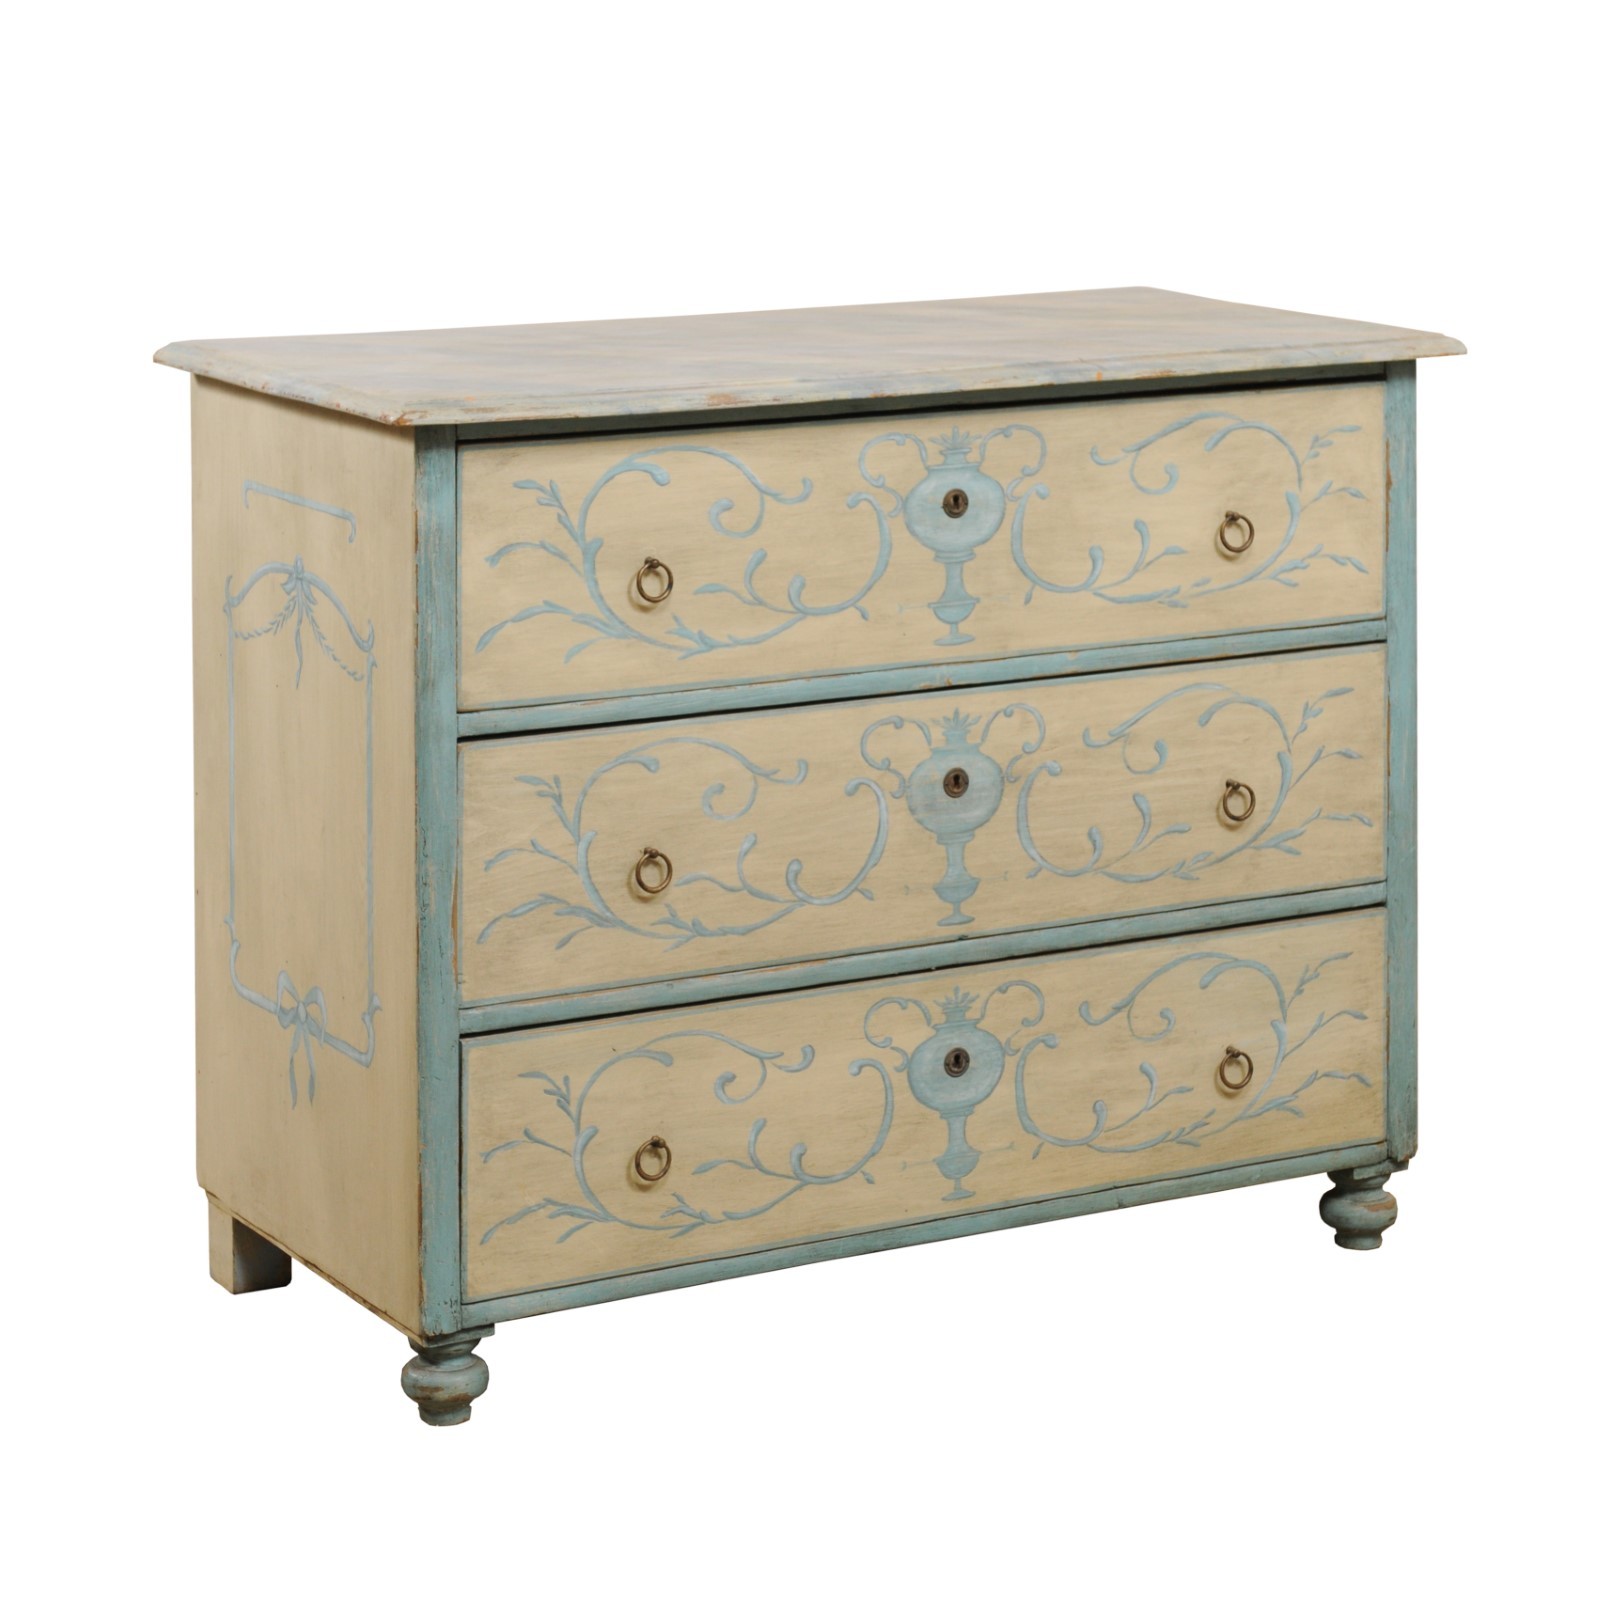 Antique Hand-Painted Chest from Europe 